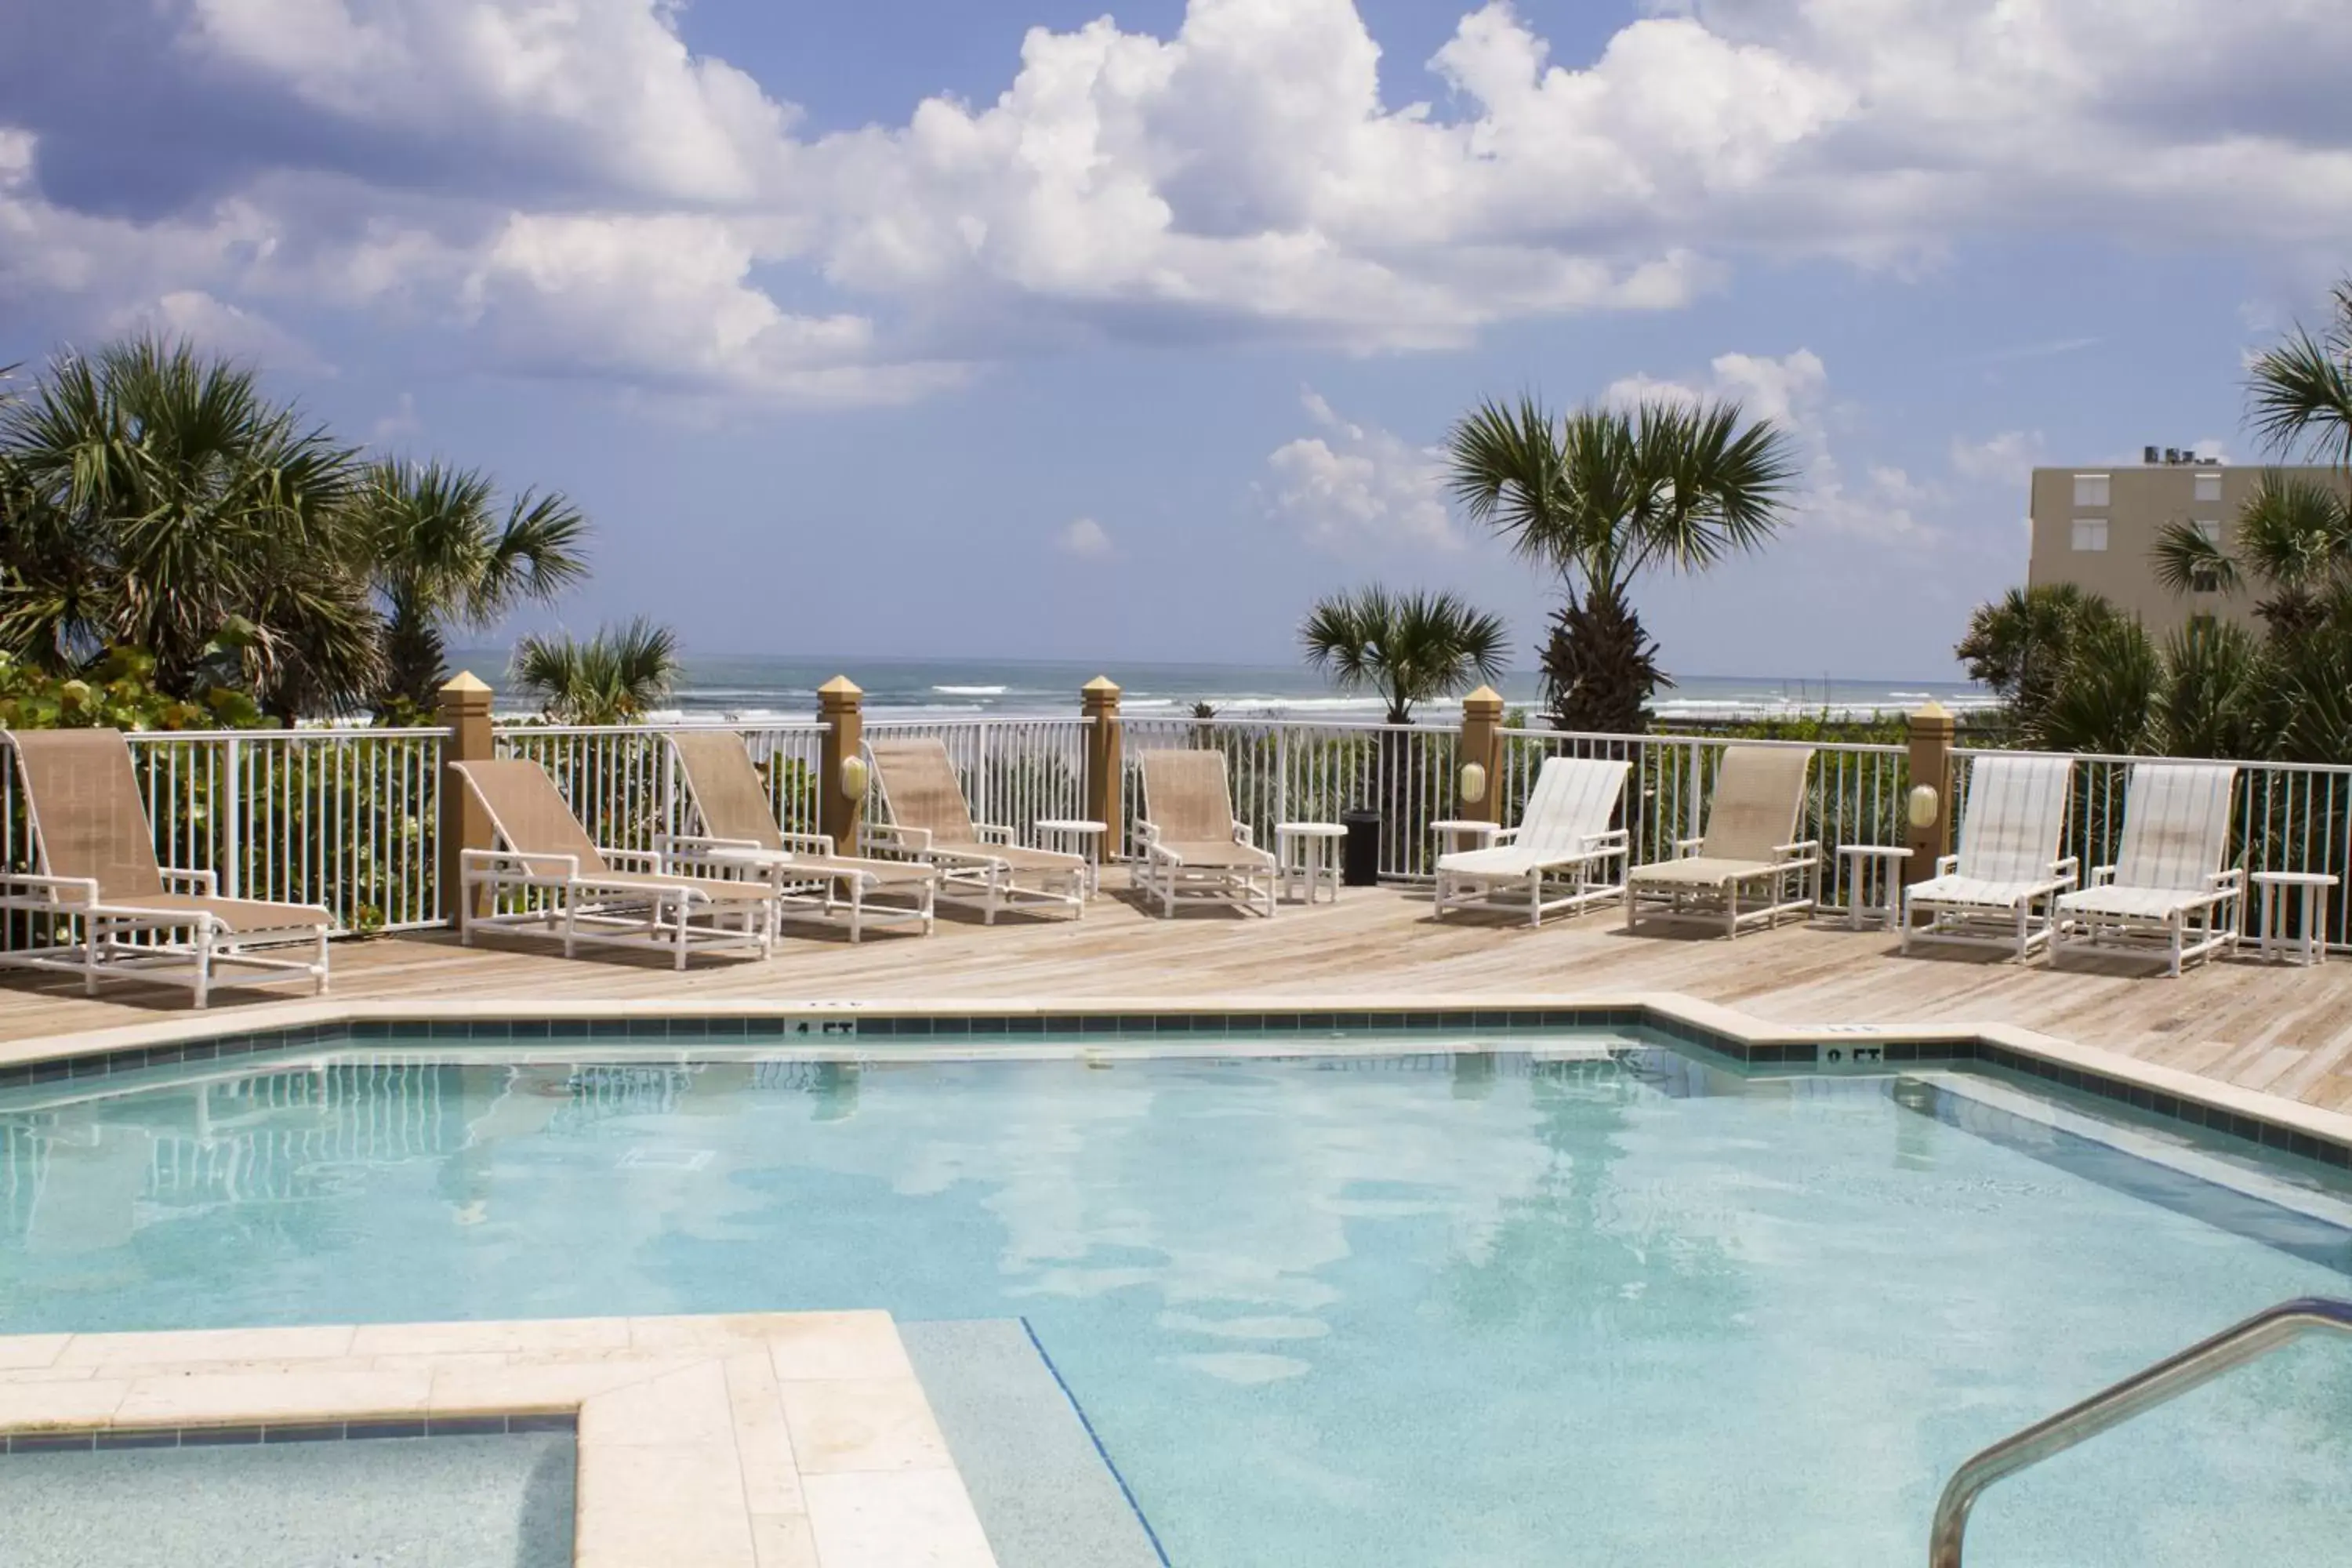 Swimming Pool in New Smyrna Waves by Exploria Resorts